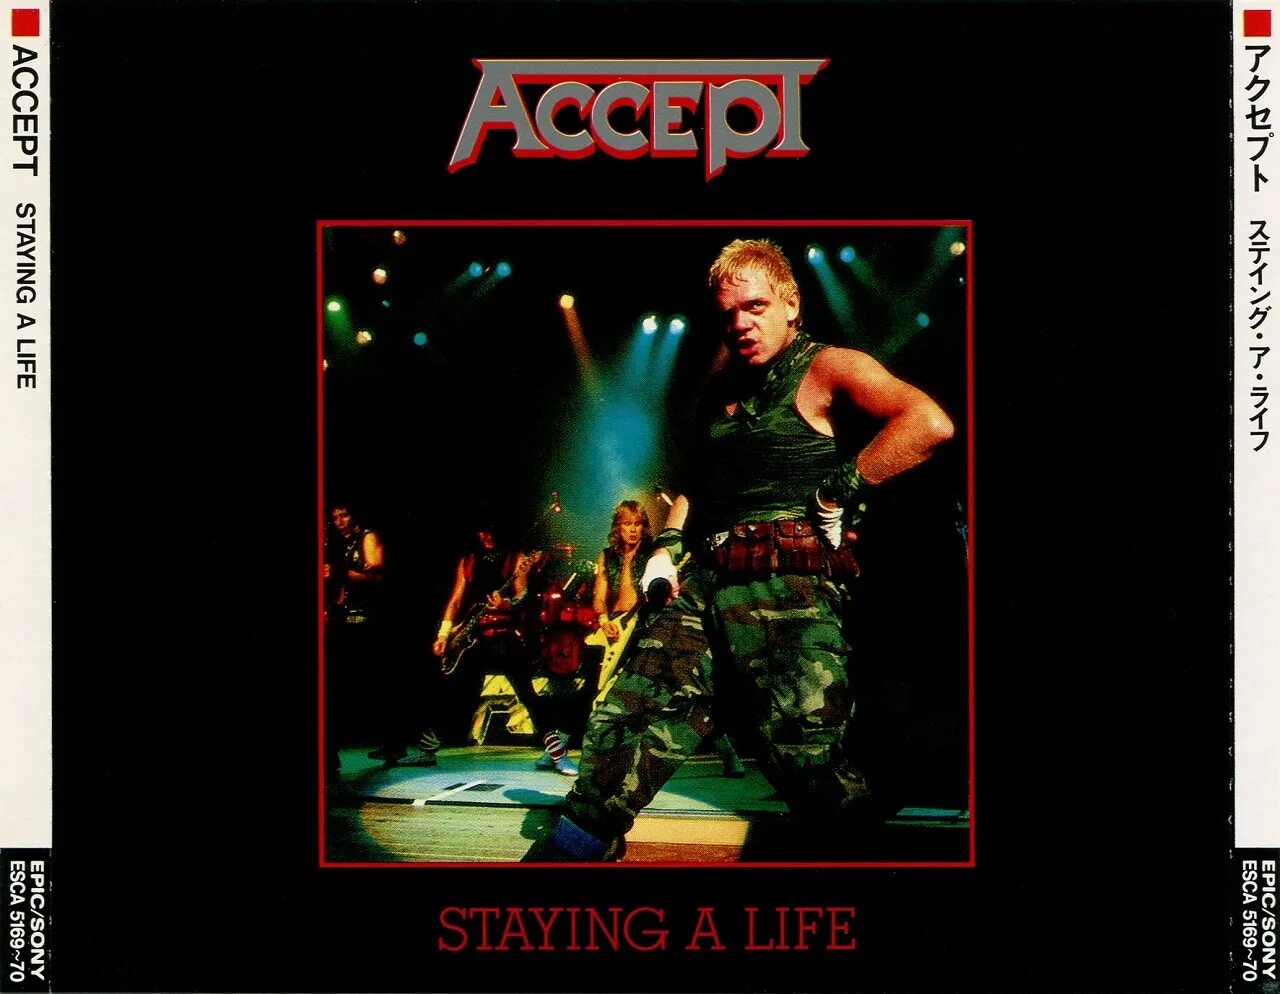 Accept princess. Accept. Accept "staying a Life, CD". Accept "staying a Life (2lp)". Accept Burning.